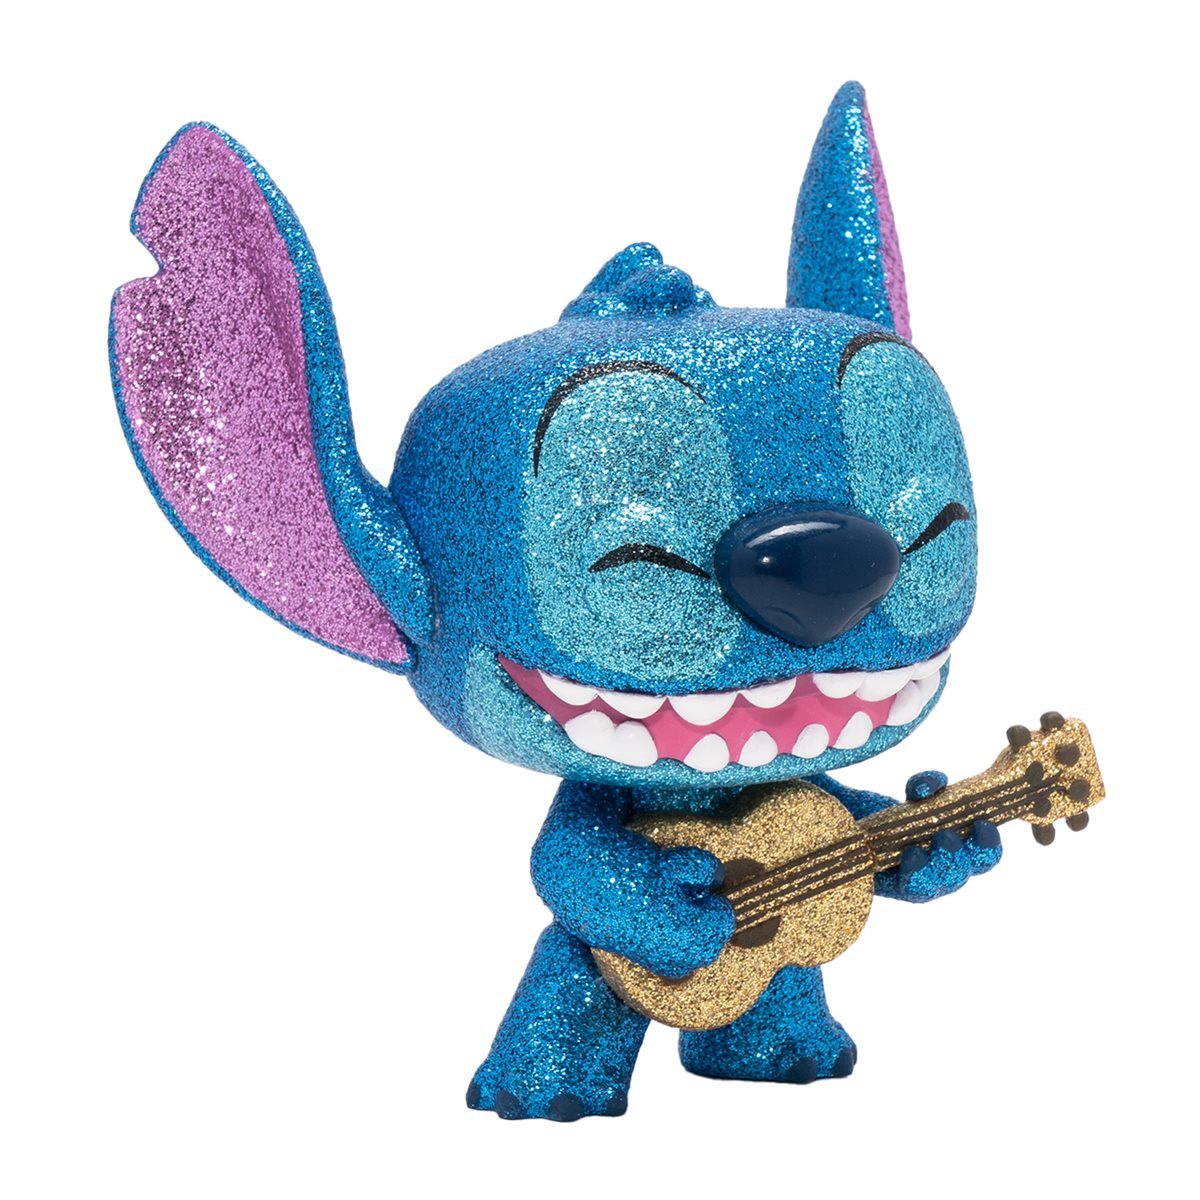 Only Entertainment Earth Has This Exclusive Glittery Stitch Funko Pop!